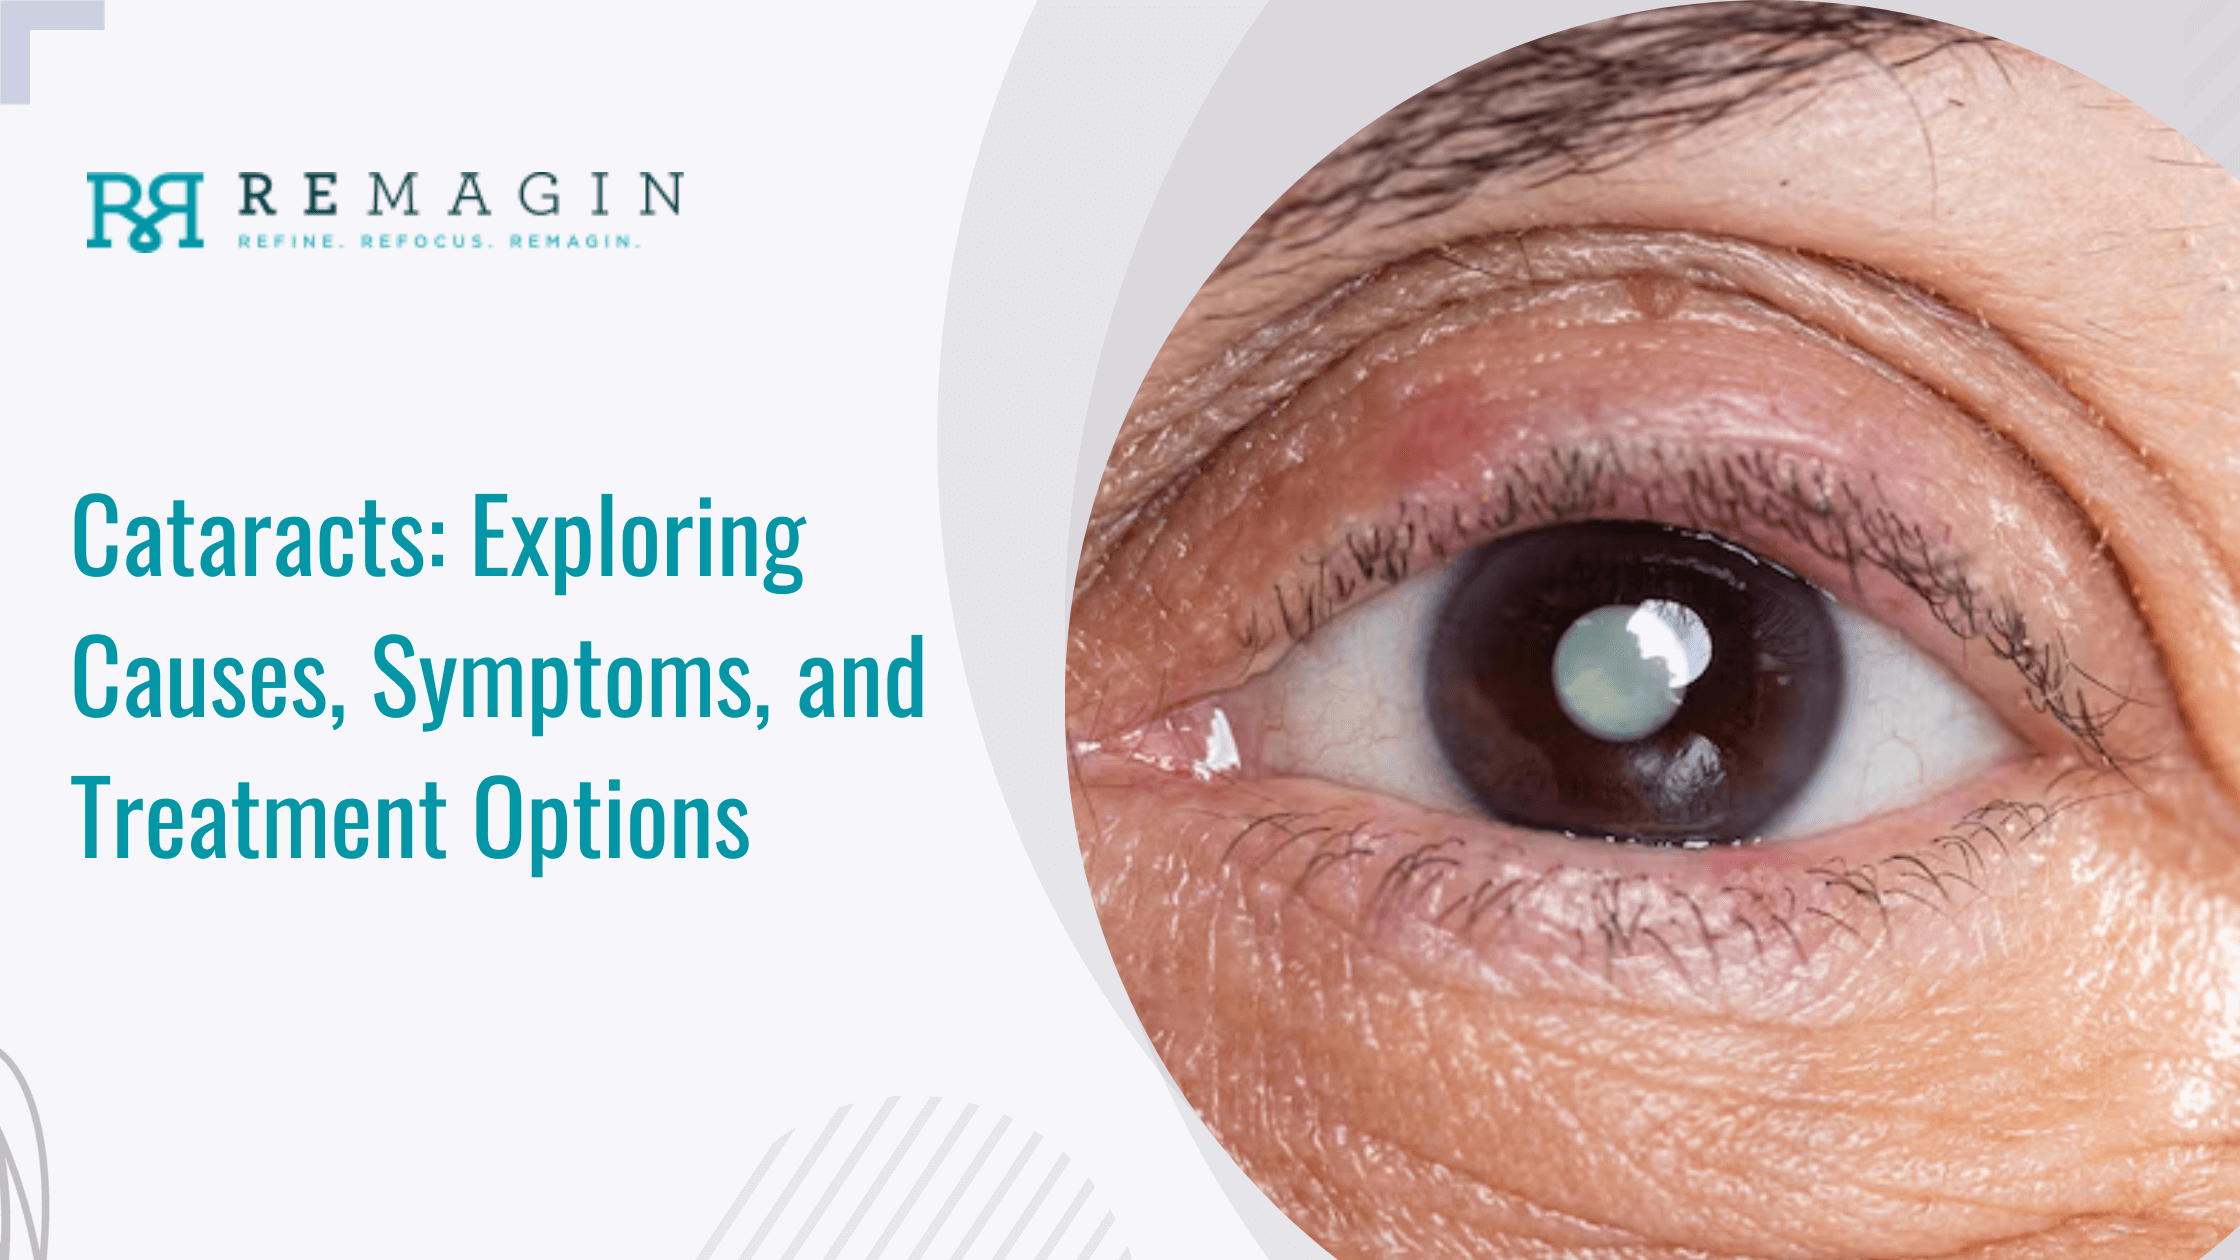 Cataracts: Exploring Causes, Symptoms, and Treatment Options